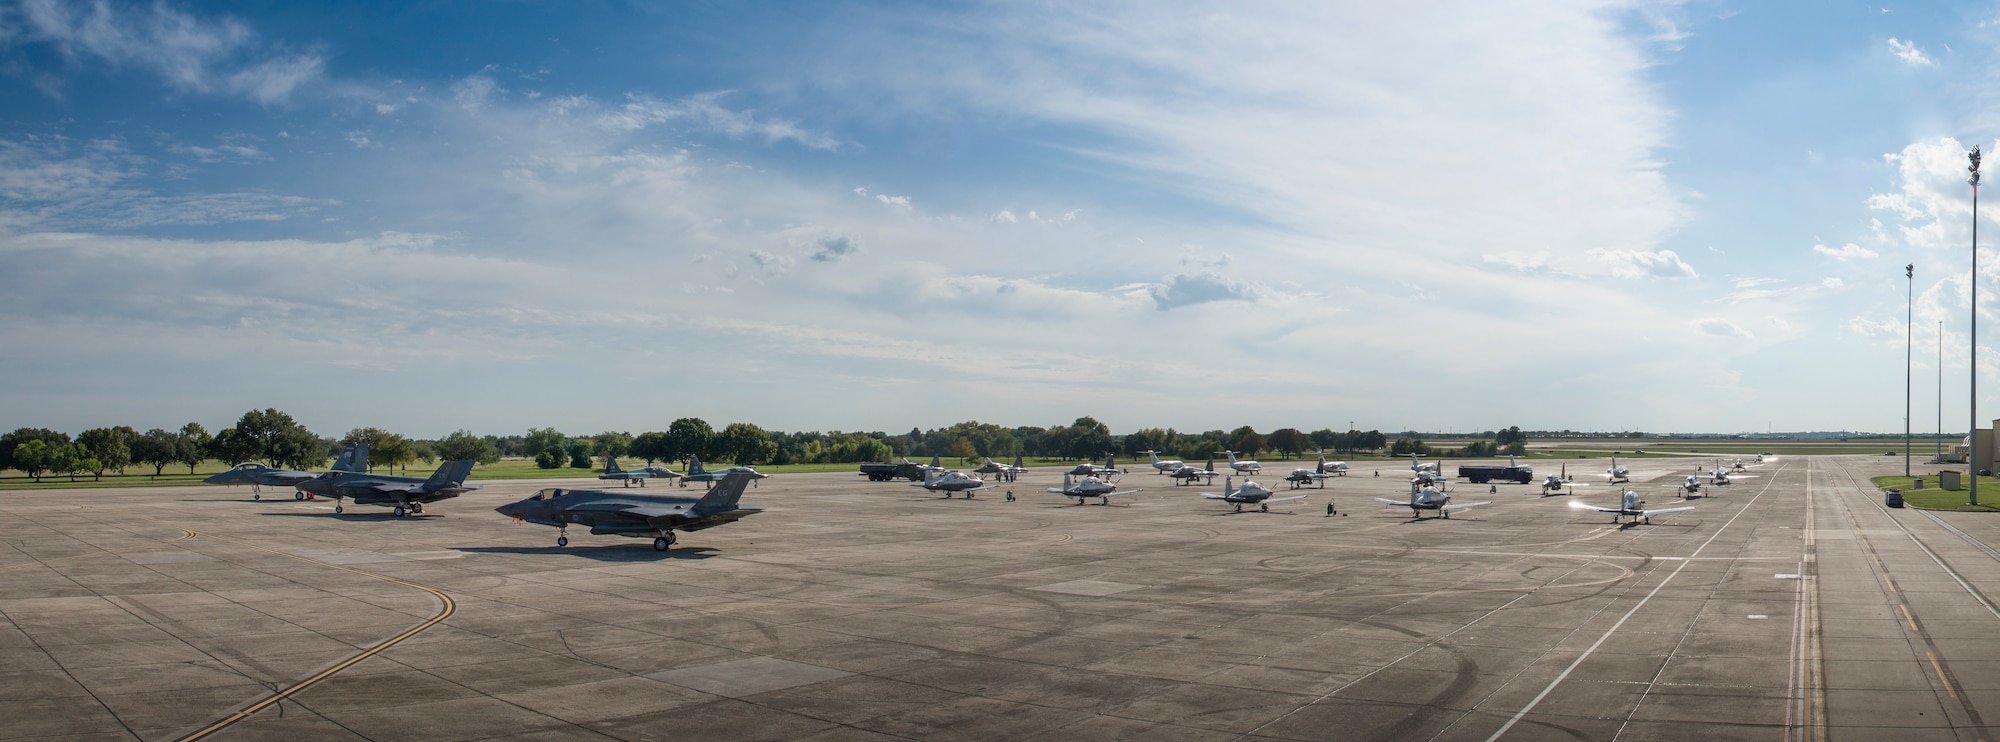 Air Education and Training Command aircraft are displayed on the flight line for the 2018 Flying Training Awards ceremony at Joint Base San Antonio-Randolph, Texas, Oct. 26, 2018. The second annual event, hosted by the 19th Air Force, recognized the dedicated efforts of the exceptional individuals and teams across AETC who continue to produce highly qualified aircrew for the Air Force over the last fiscal year. (U.S. Air Force photo by Senior Airman Stormy Archer)